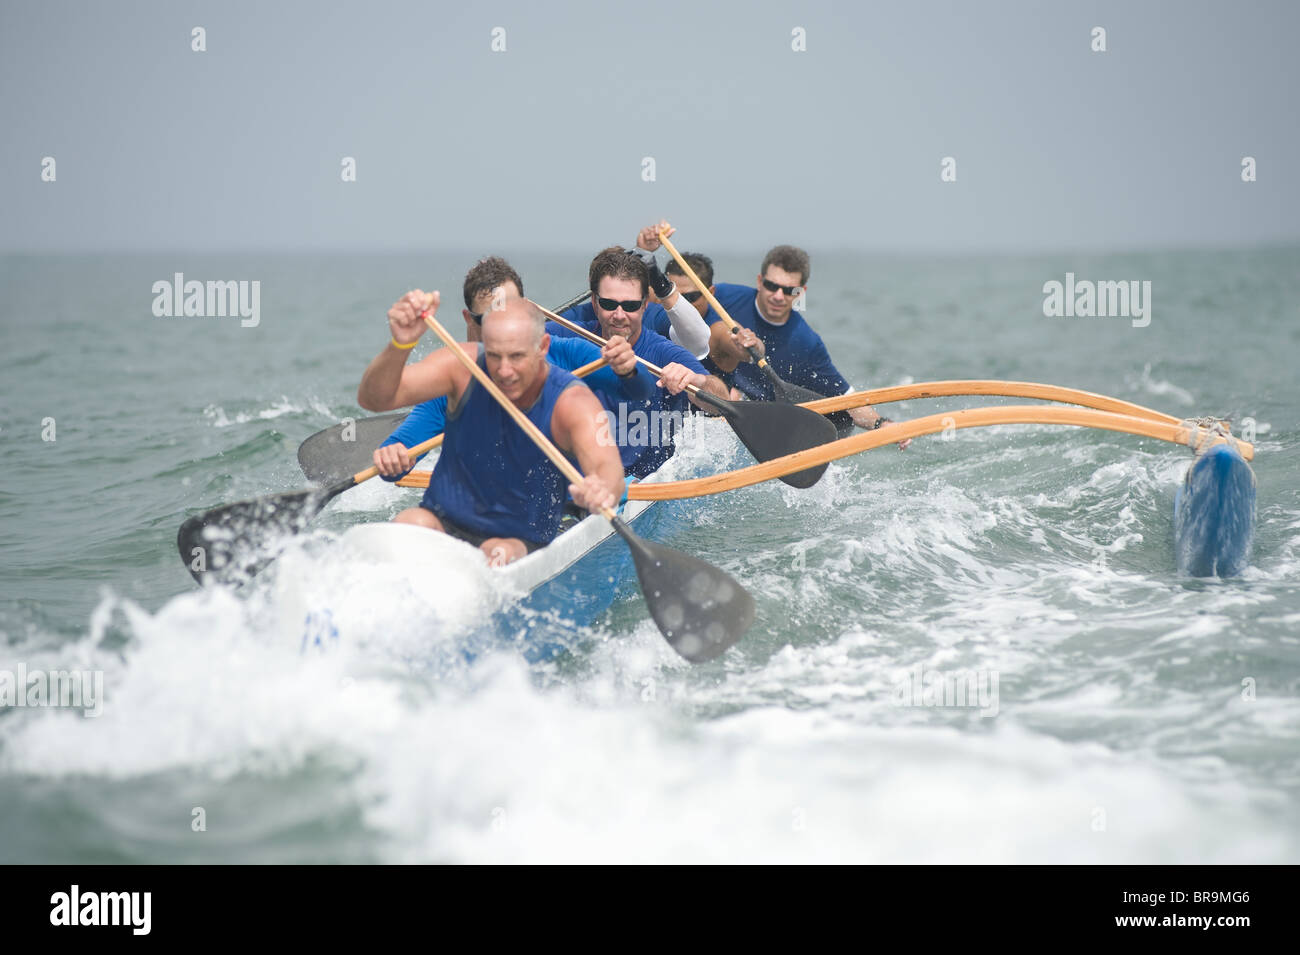 Outrigger canoeing team on water Stock Photo